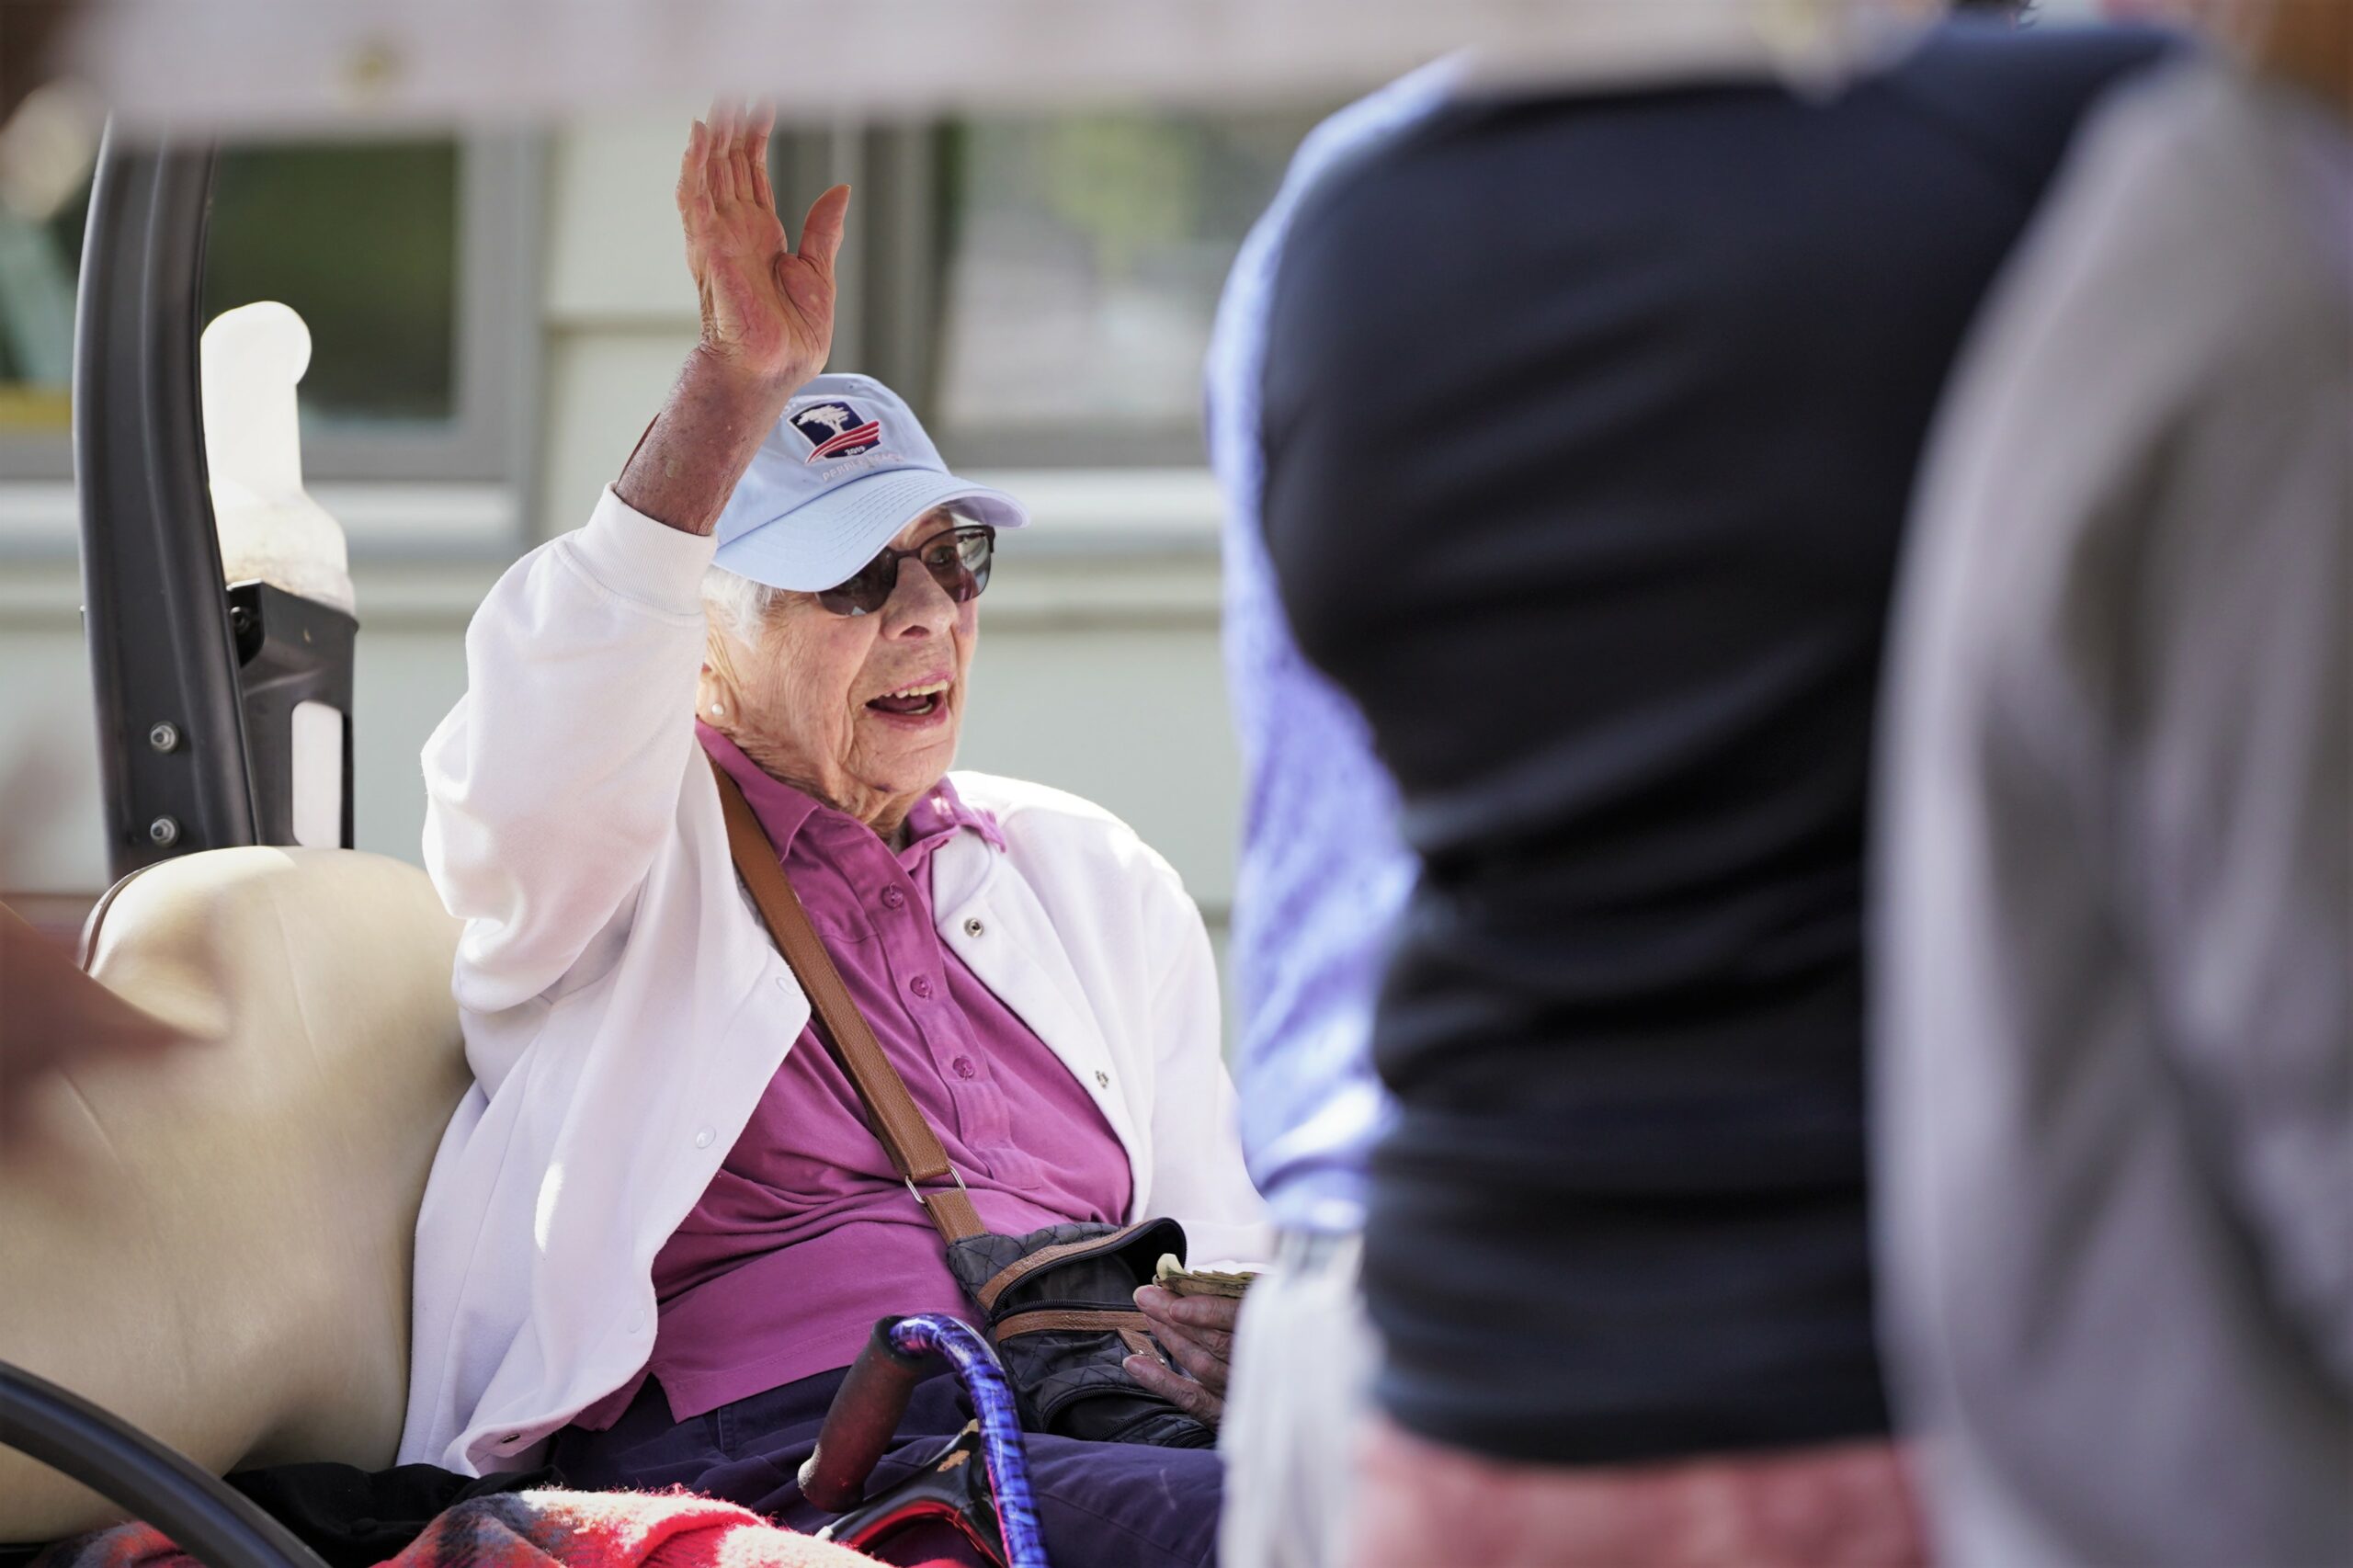 Ruth Howe, a founder of Bemidji State women's athletics and half of the namesake for the Howe-Welle Women's Athletics Golf Tournament, waves to the crowd after being acknowledged on Friday, Aug. 25, 2023, at the Bemidji Town and Country Club. (Micah Friez / Bemidji State)